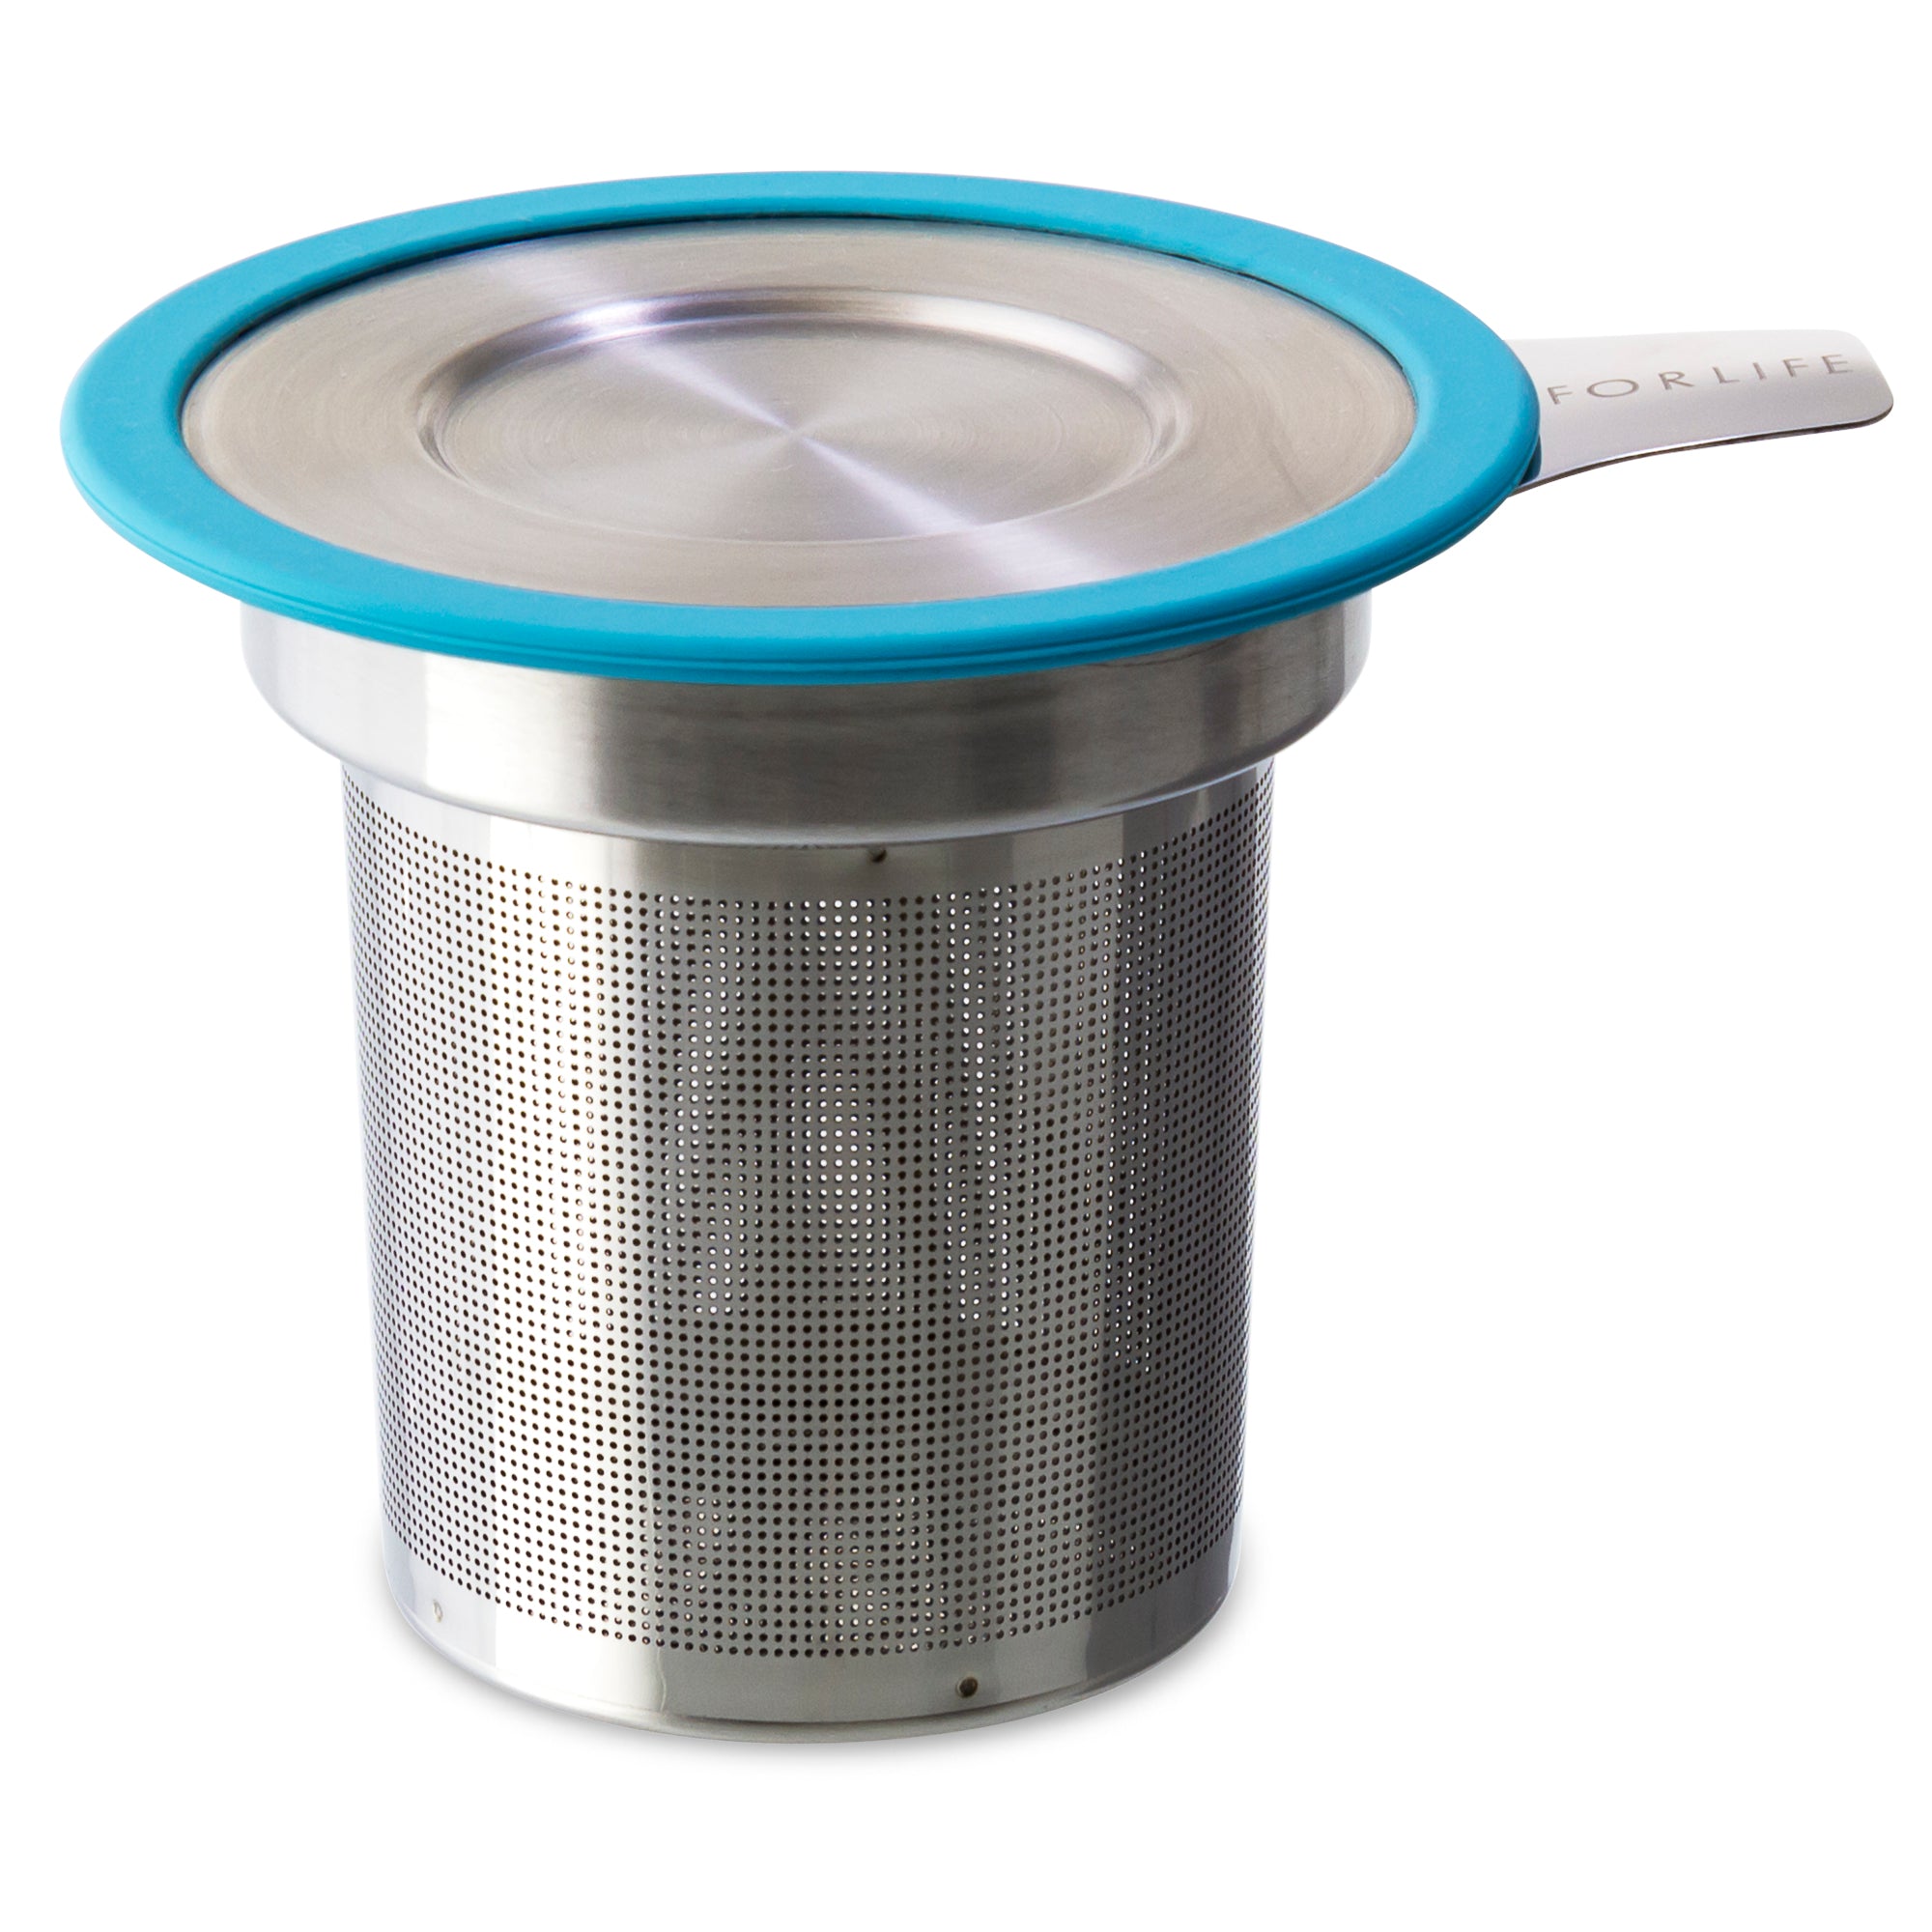 Brew-in-Mug Extra-fine Tea Infuser<br>with Lid